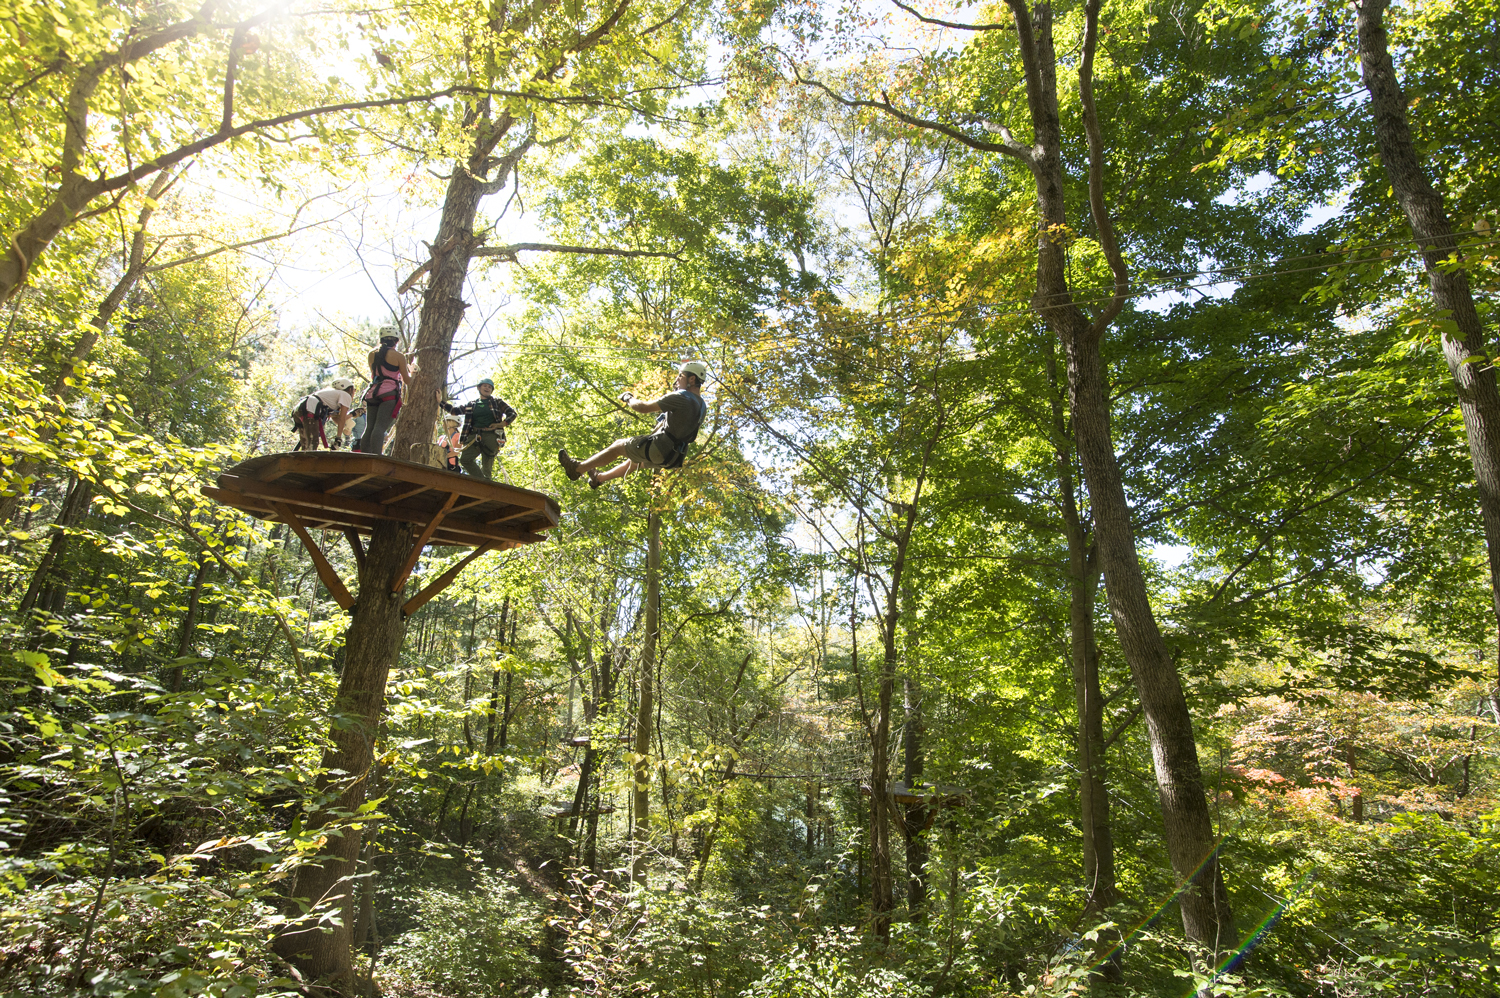 Participants of the Adventure Team Challenge North Carolina will undertake the Canopy Tour. Photograph courtesy U.S. National Whitewater Center.